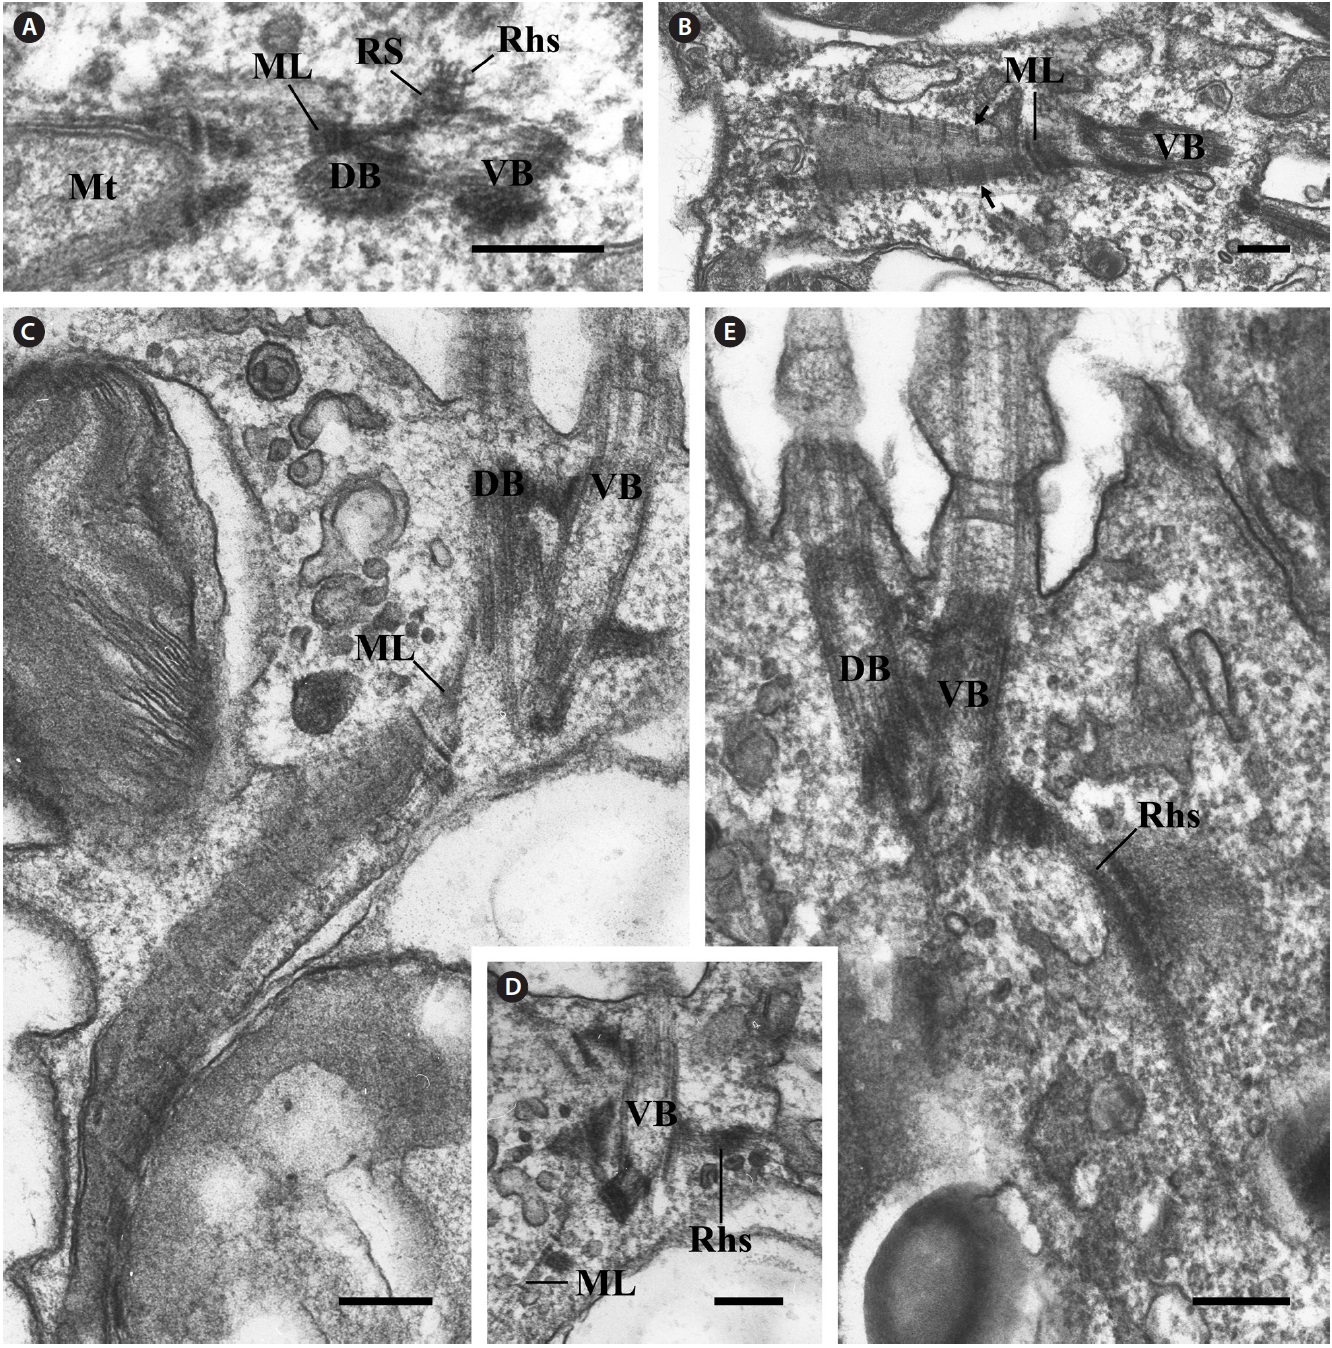 Transmission electron micrographs of the mitochondrion-associated lamella (ML) and rhizostyle (Rhs). (A) Oblique section of the two basal bodies showing the ML and Rhs, which originated at the rhizostyle-associated striated fiber (RS). The Rhs consisted of three microtubules. (B) Oblique section of the proximal ventral basal body (VB) showing that the ML divides into two fibrous bands. (C) Longitudinal section showing the ML extending toward the posterior and dorsal side of the cell. (D) Longitudinal section showing the spatial relationship between the Rhs and ML. (E) Longitudinal section showing the short Rhs extending to the middle of the cell. DB, dorsal basal body; Mt, mitochondria. Scale bars represent: A-E, 0.2 μm.